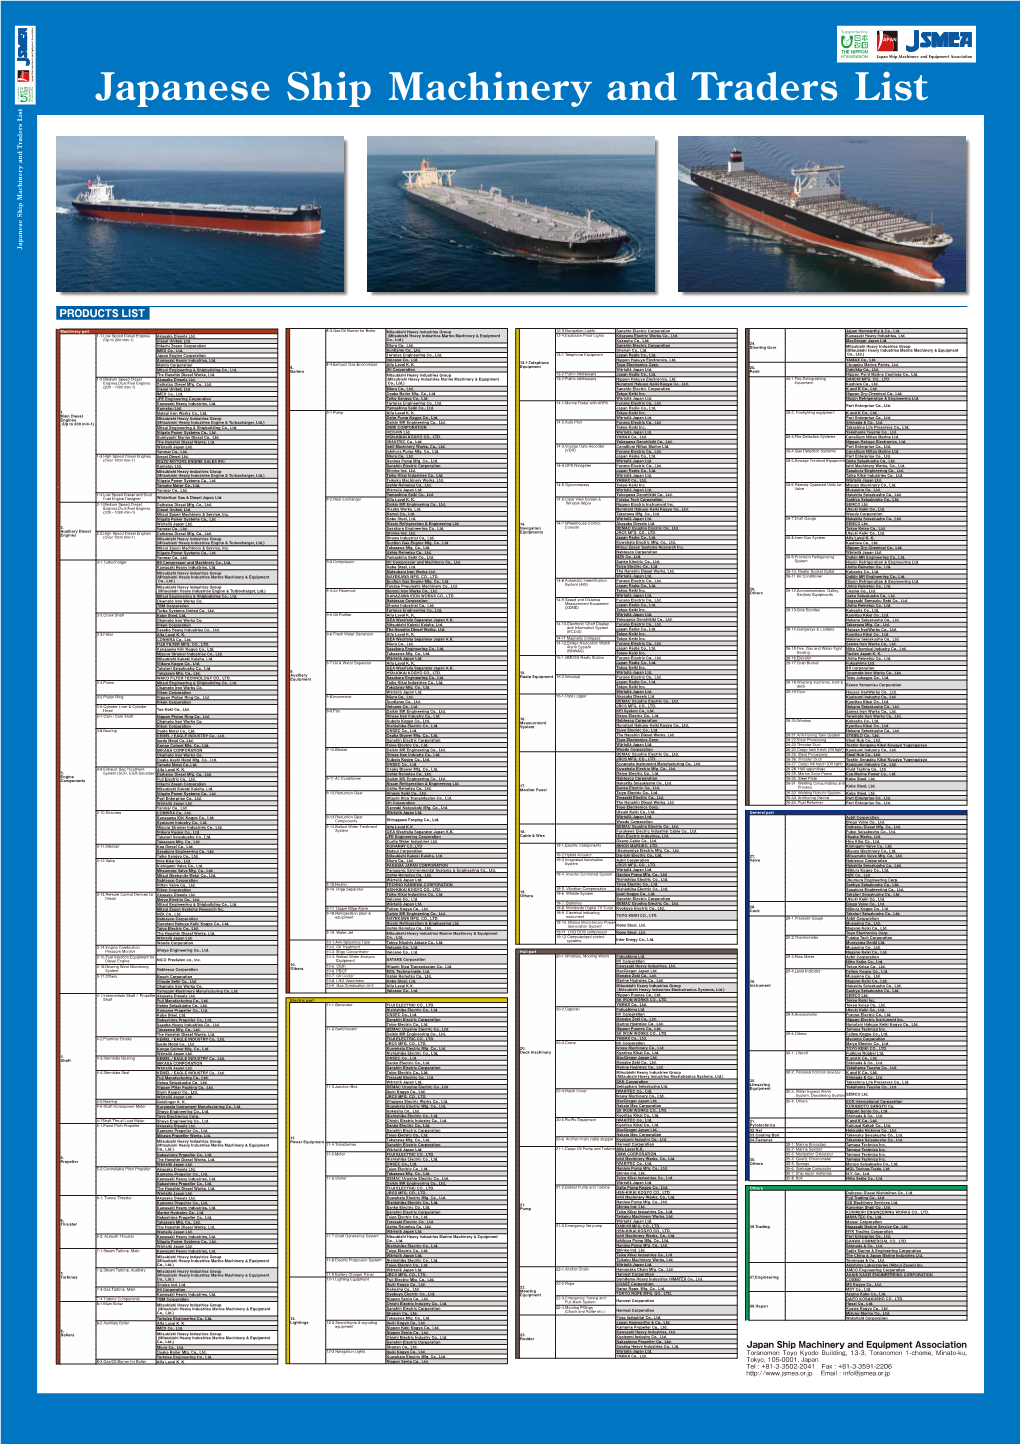 Japanese Ship Machinery and Traders List Japanese Ship Machinery and Traders List